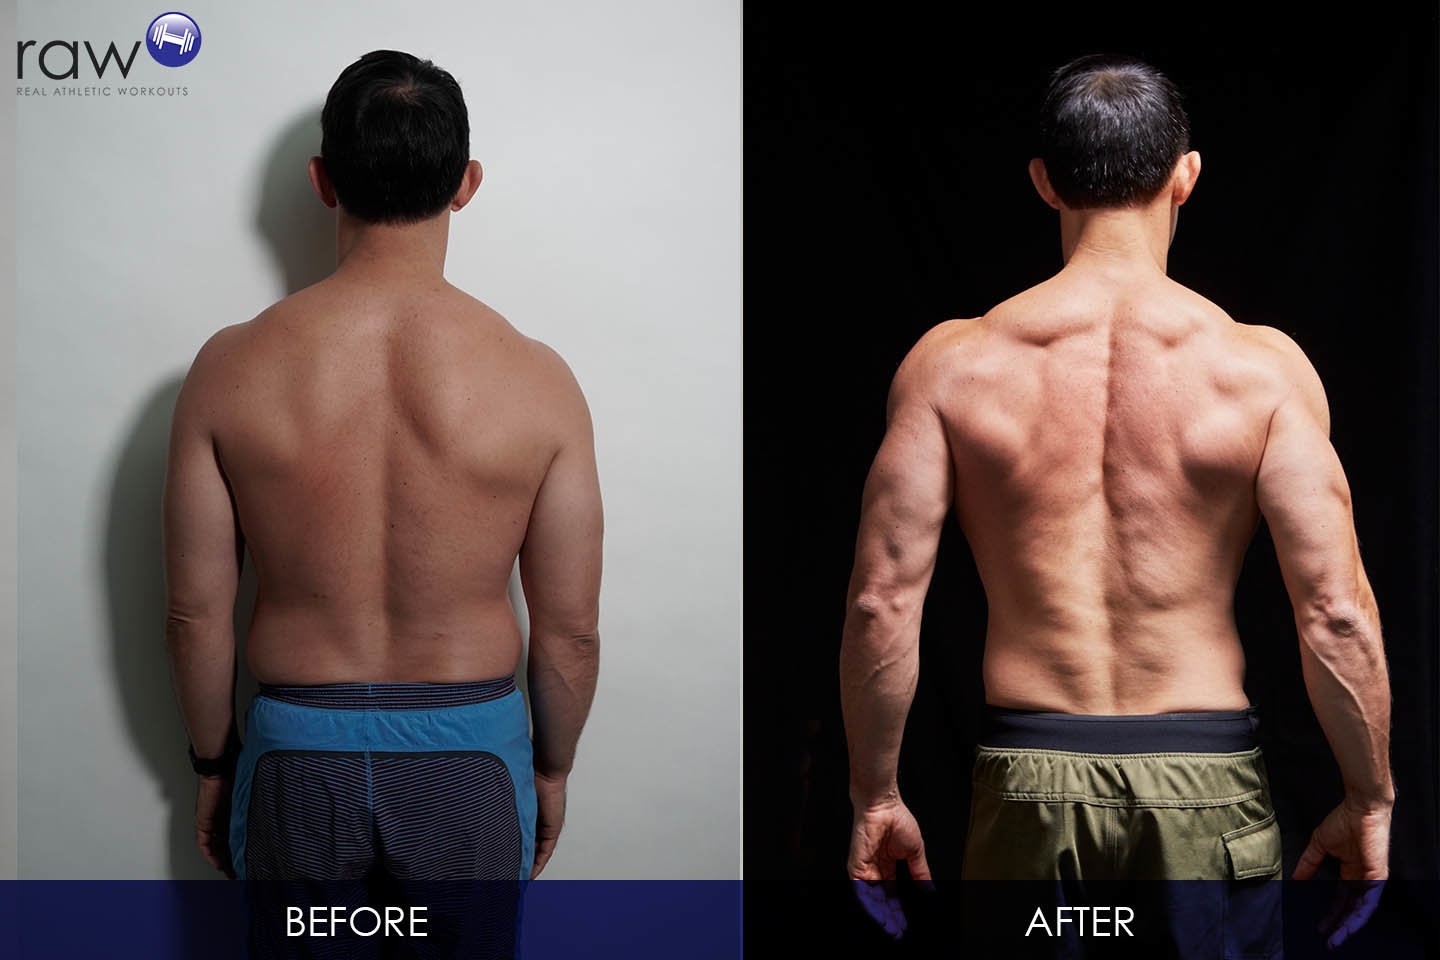 RAW Personal Training Gym Hong Kong - Mike Transformation Injury Recovery